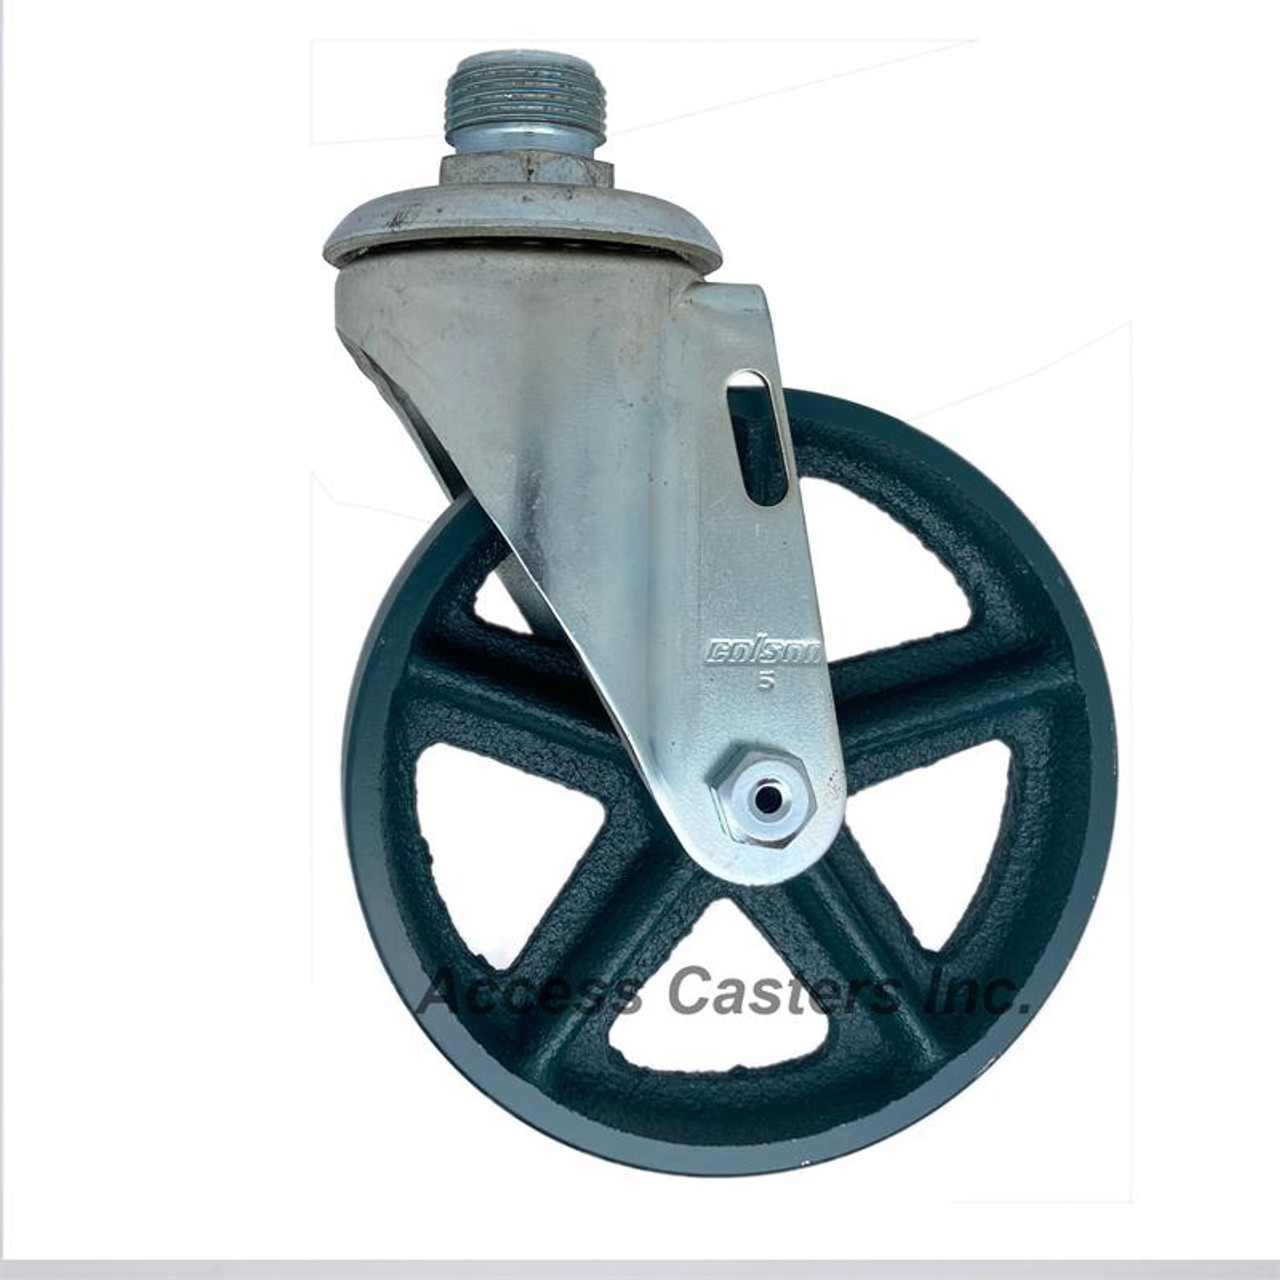 2.05253.12 5 Inch Pipe Stem Caster with Cast Iron Wheel